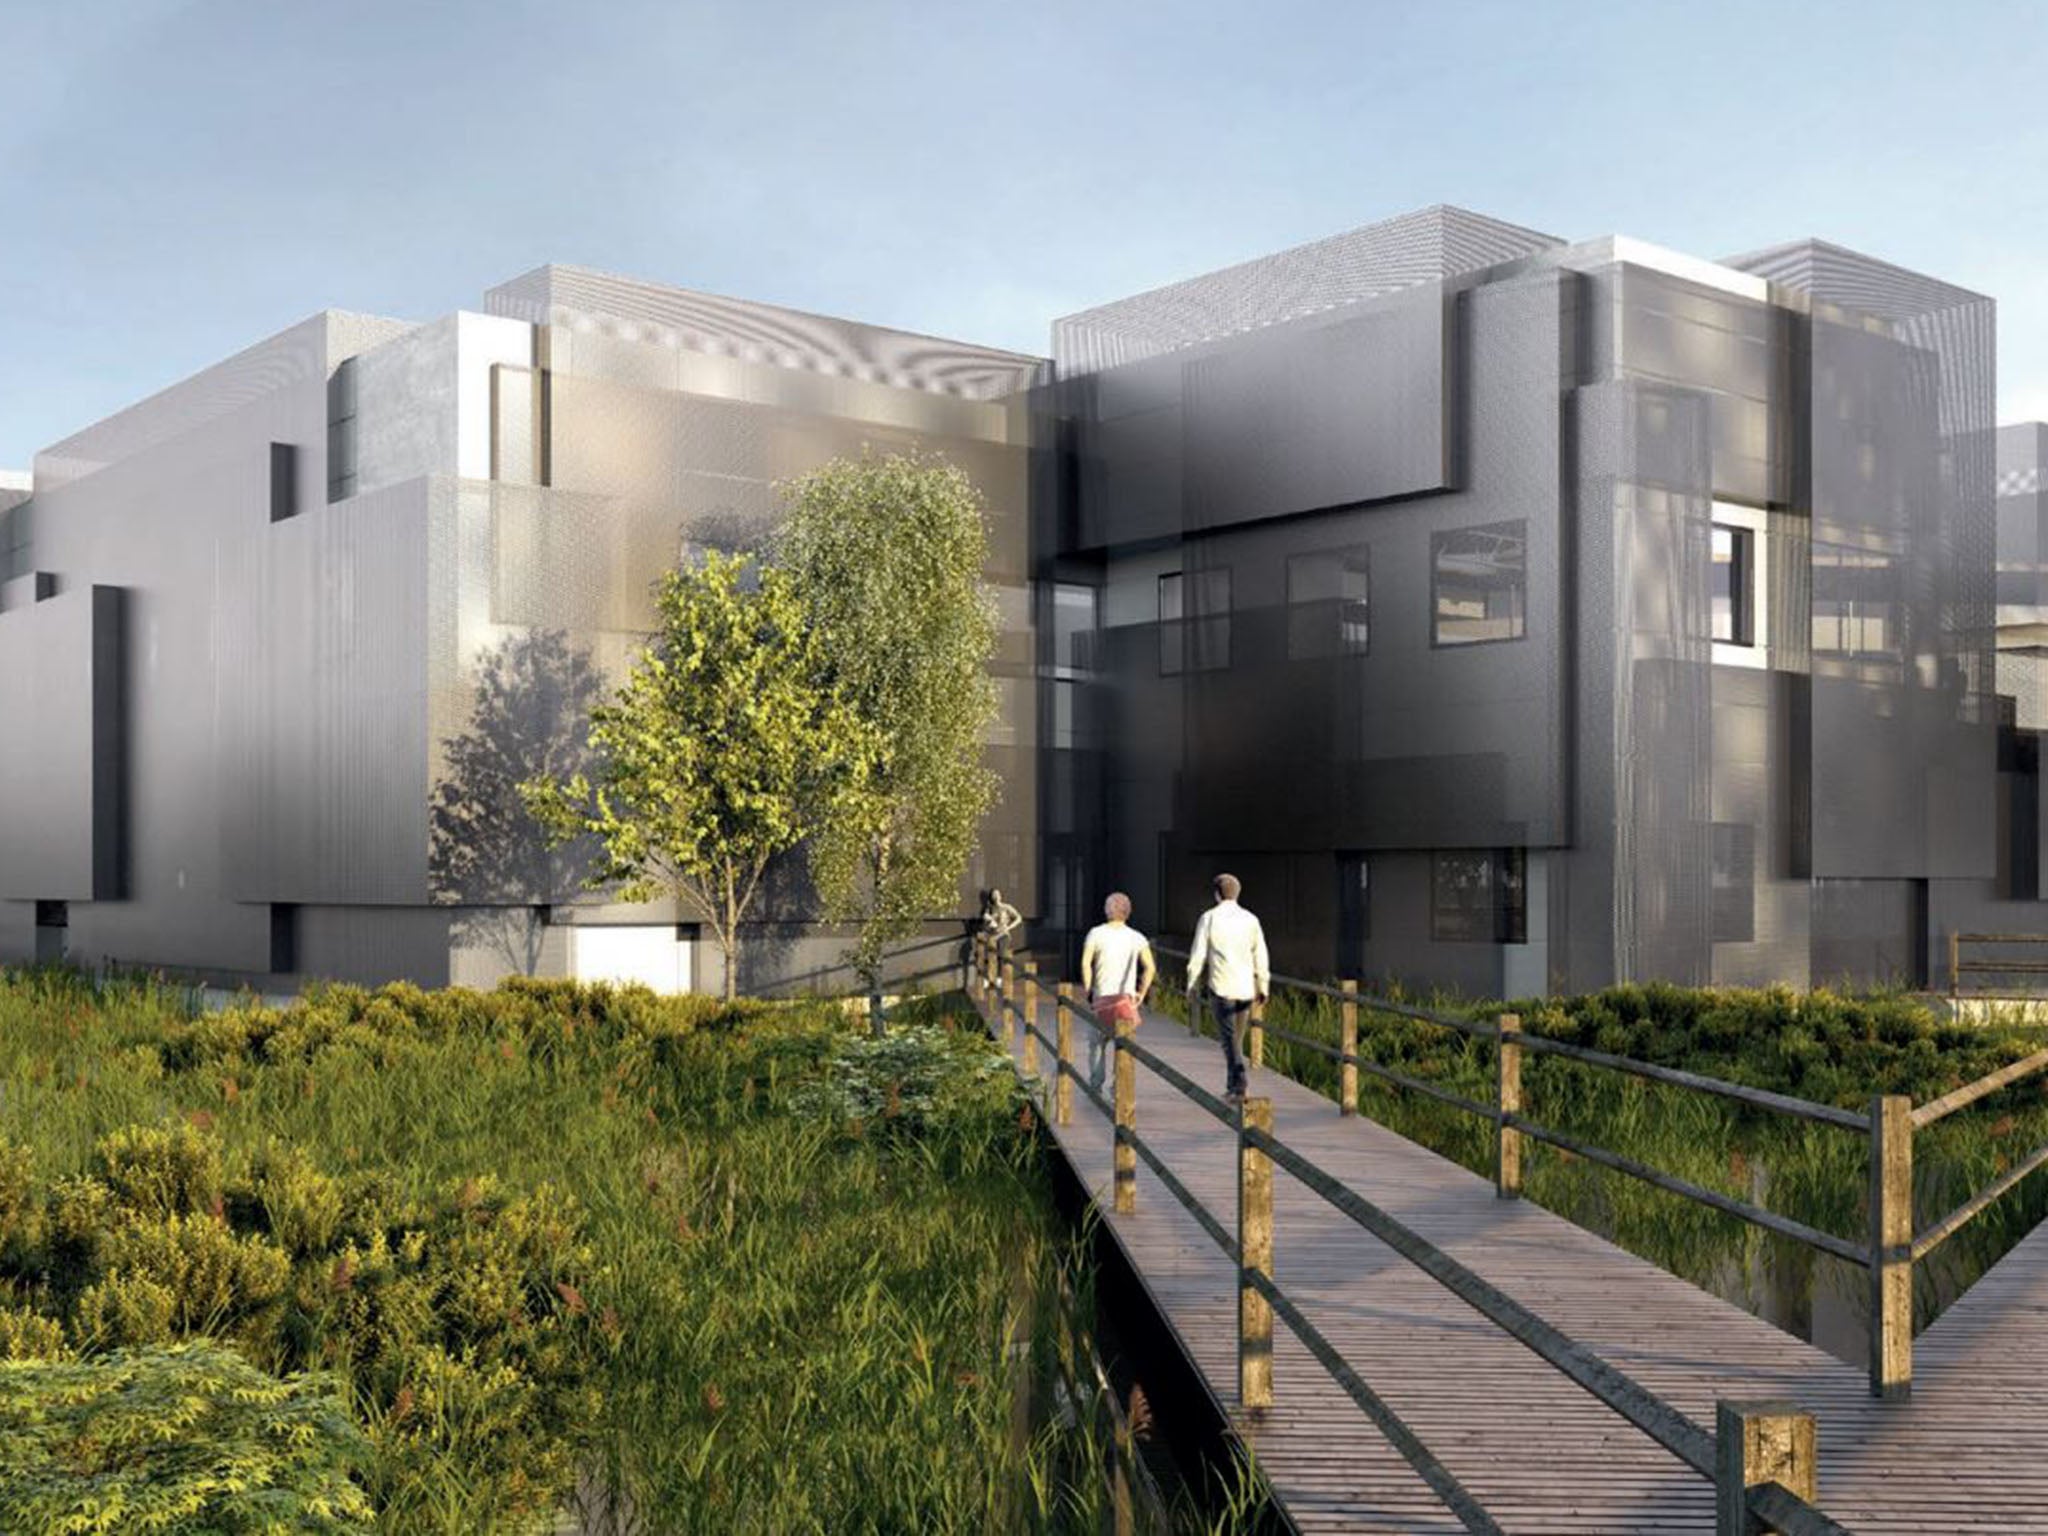 An artist's impression of the new 42 site in Fremont, California